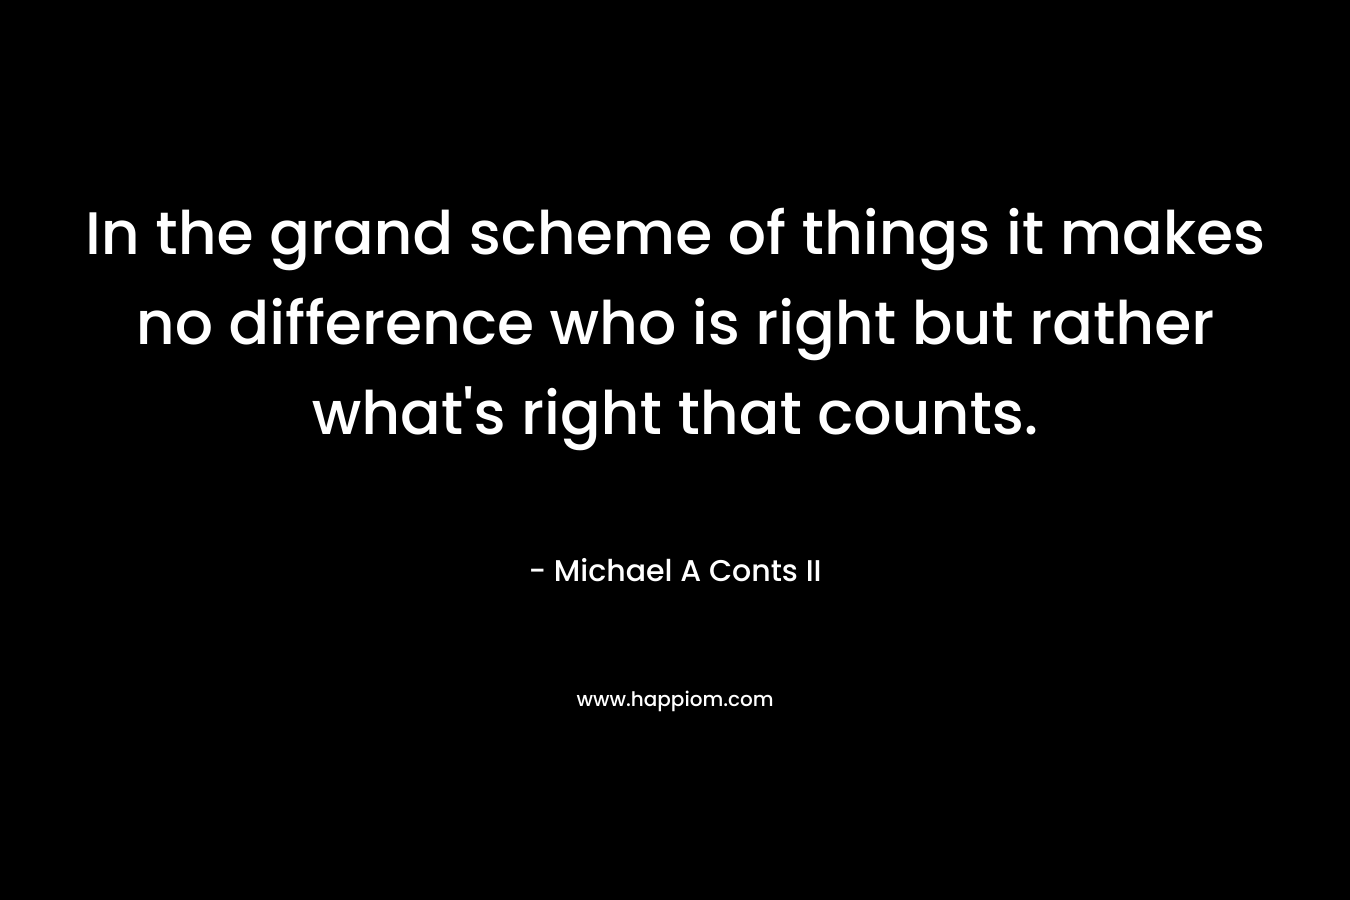 In the grand scheme of things it makes no difference who is right but rather what's right that counts.